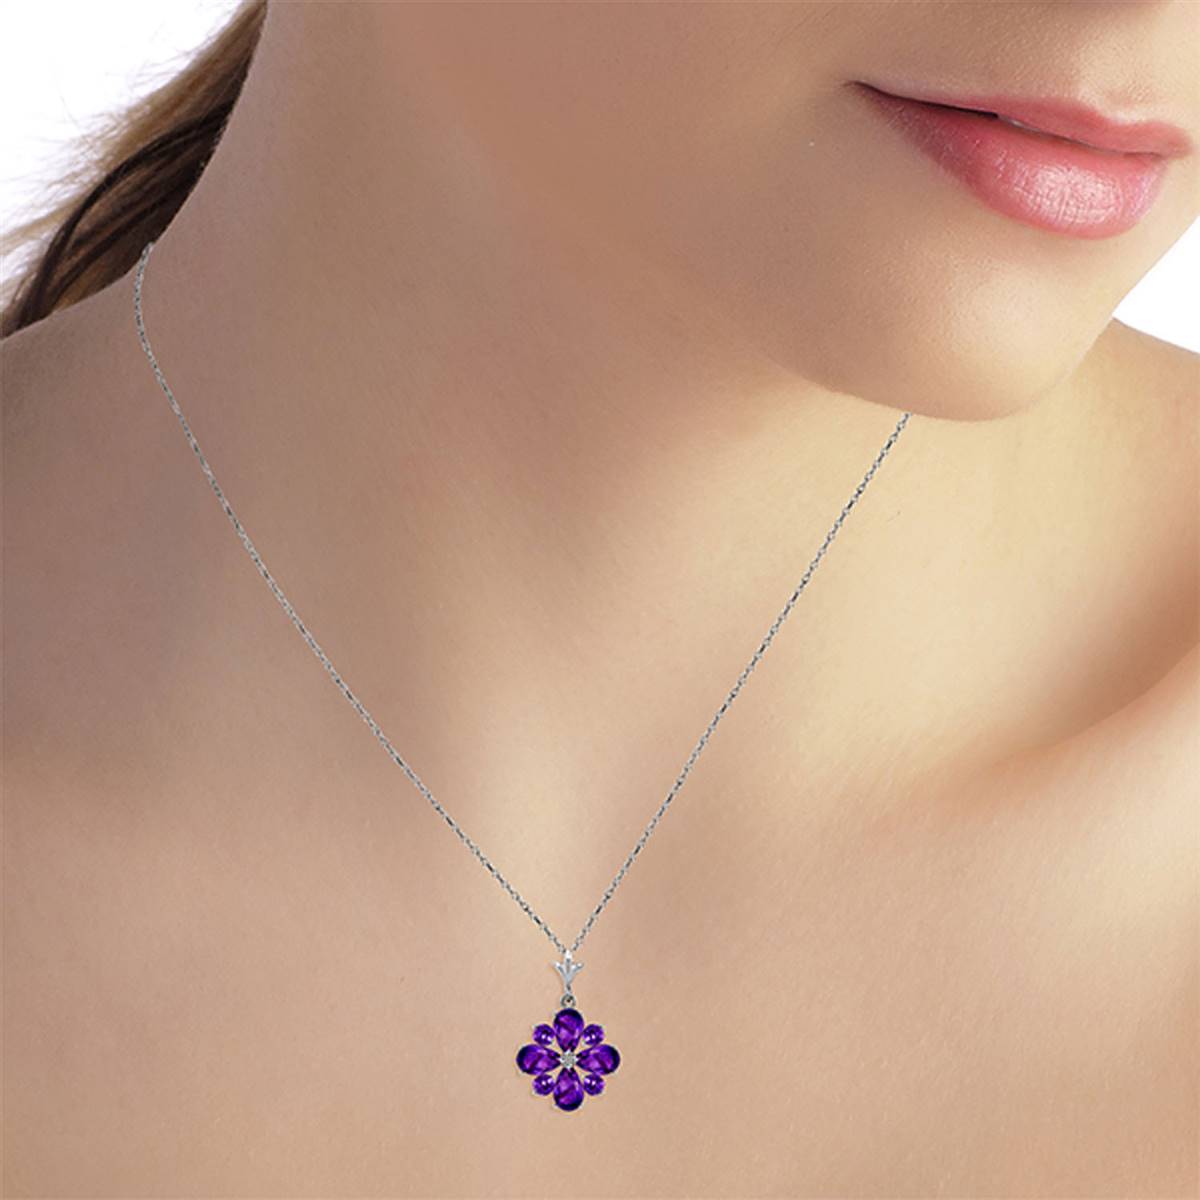 2.43 Carat 14K Solid White Gold Winter Twilight Amethyst Necklace